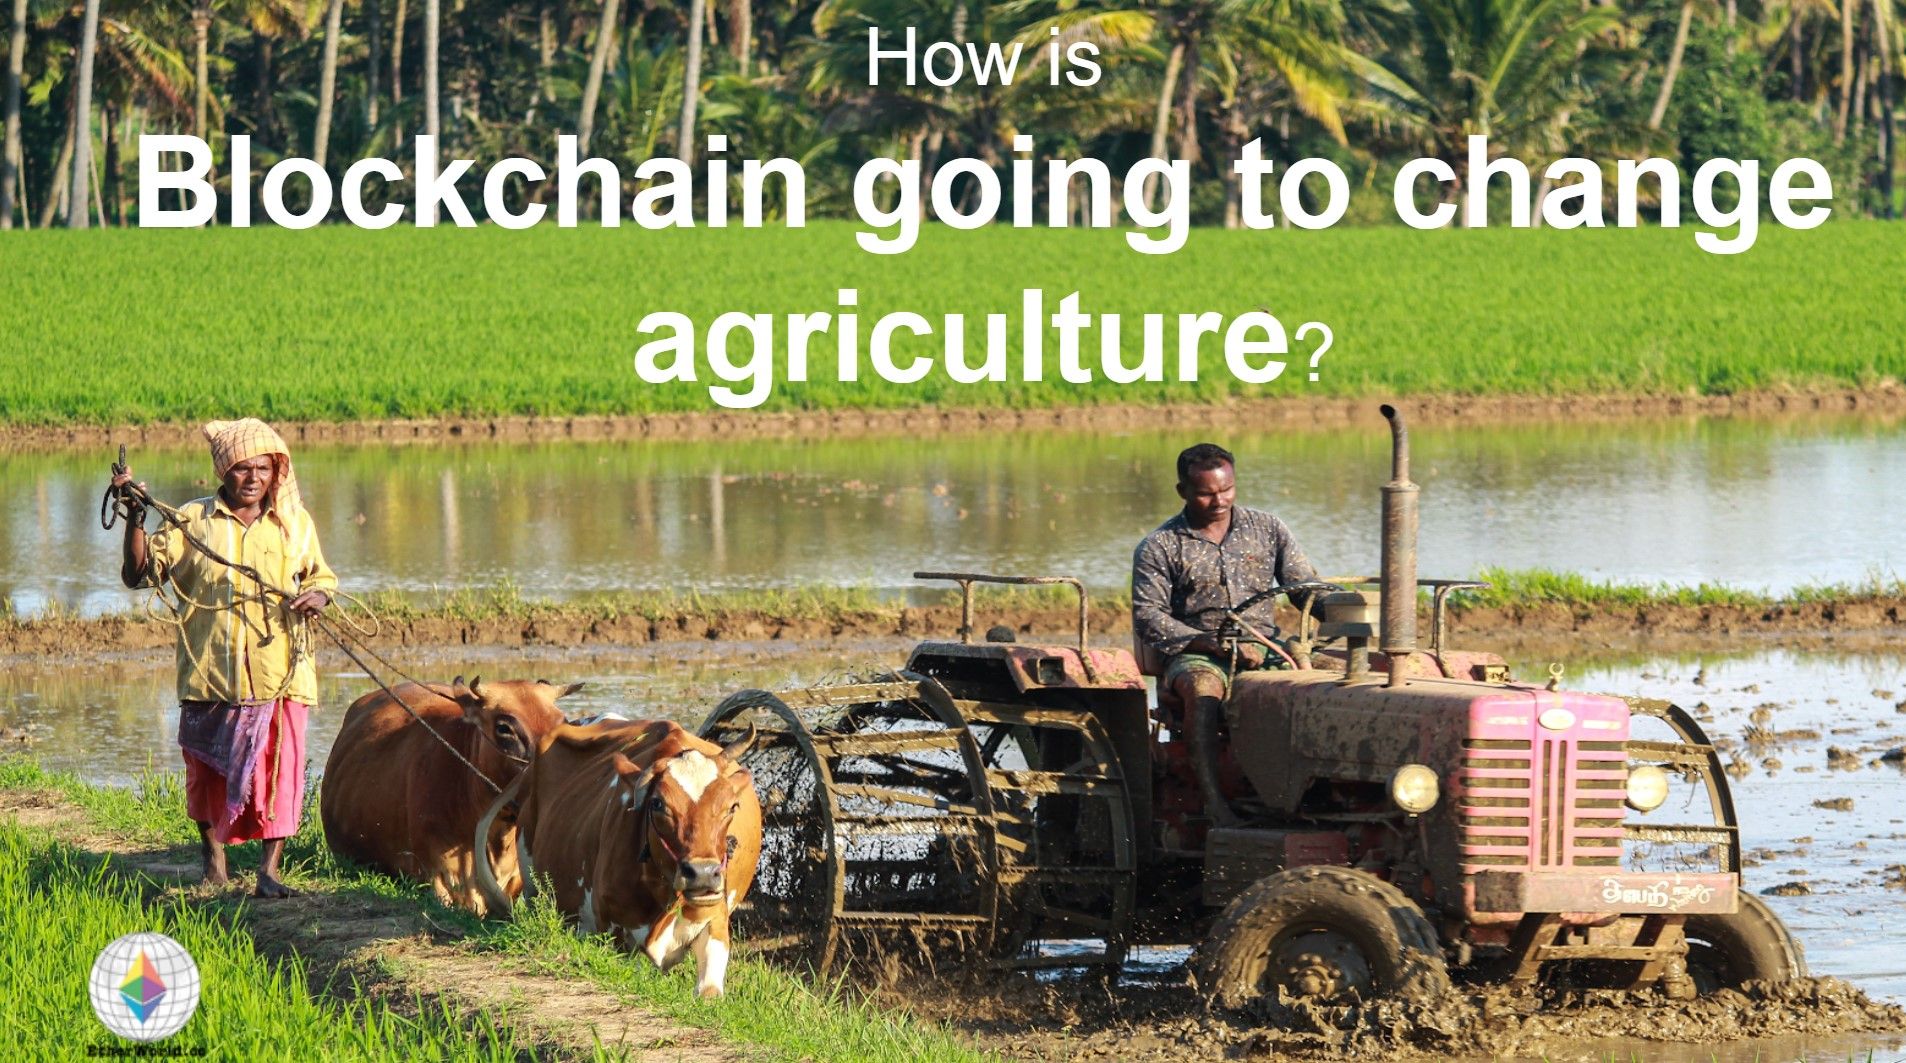 How is blockchain going to change agriculture?